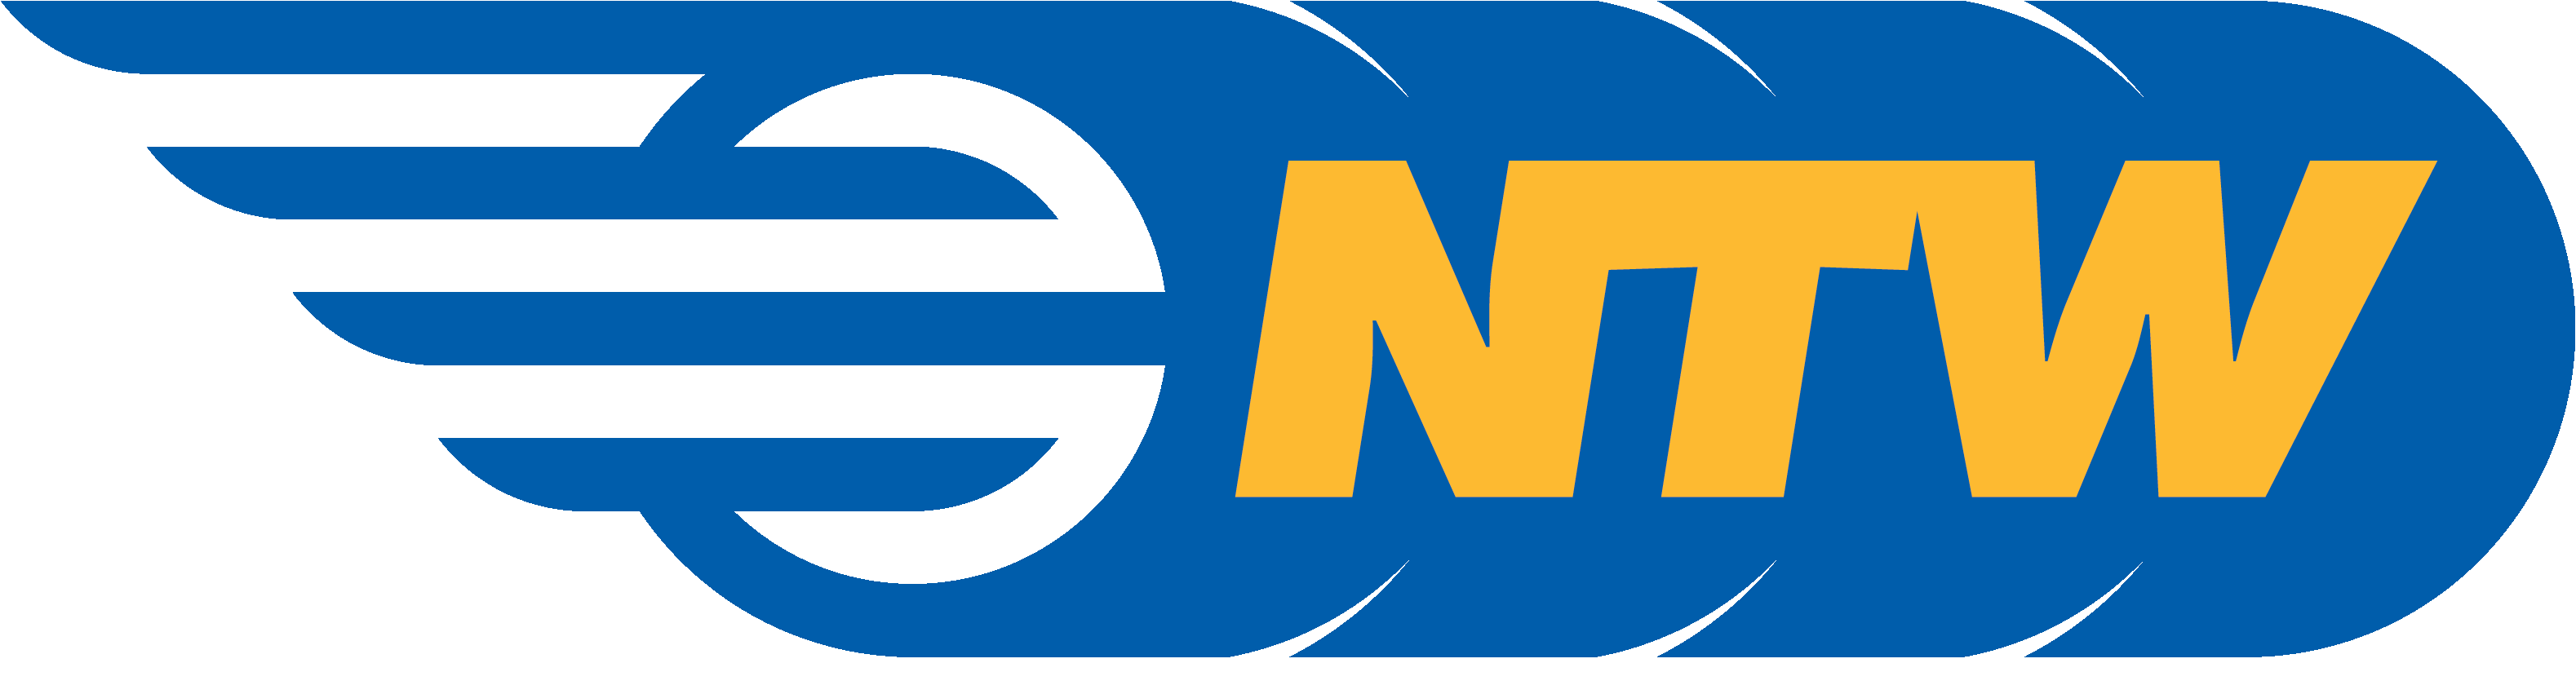 NTW Logo - ABOUT THE JOINT VENTURE